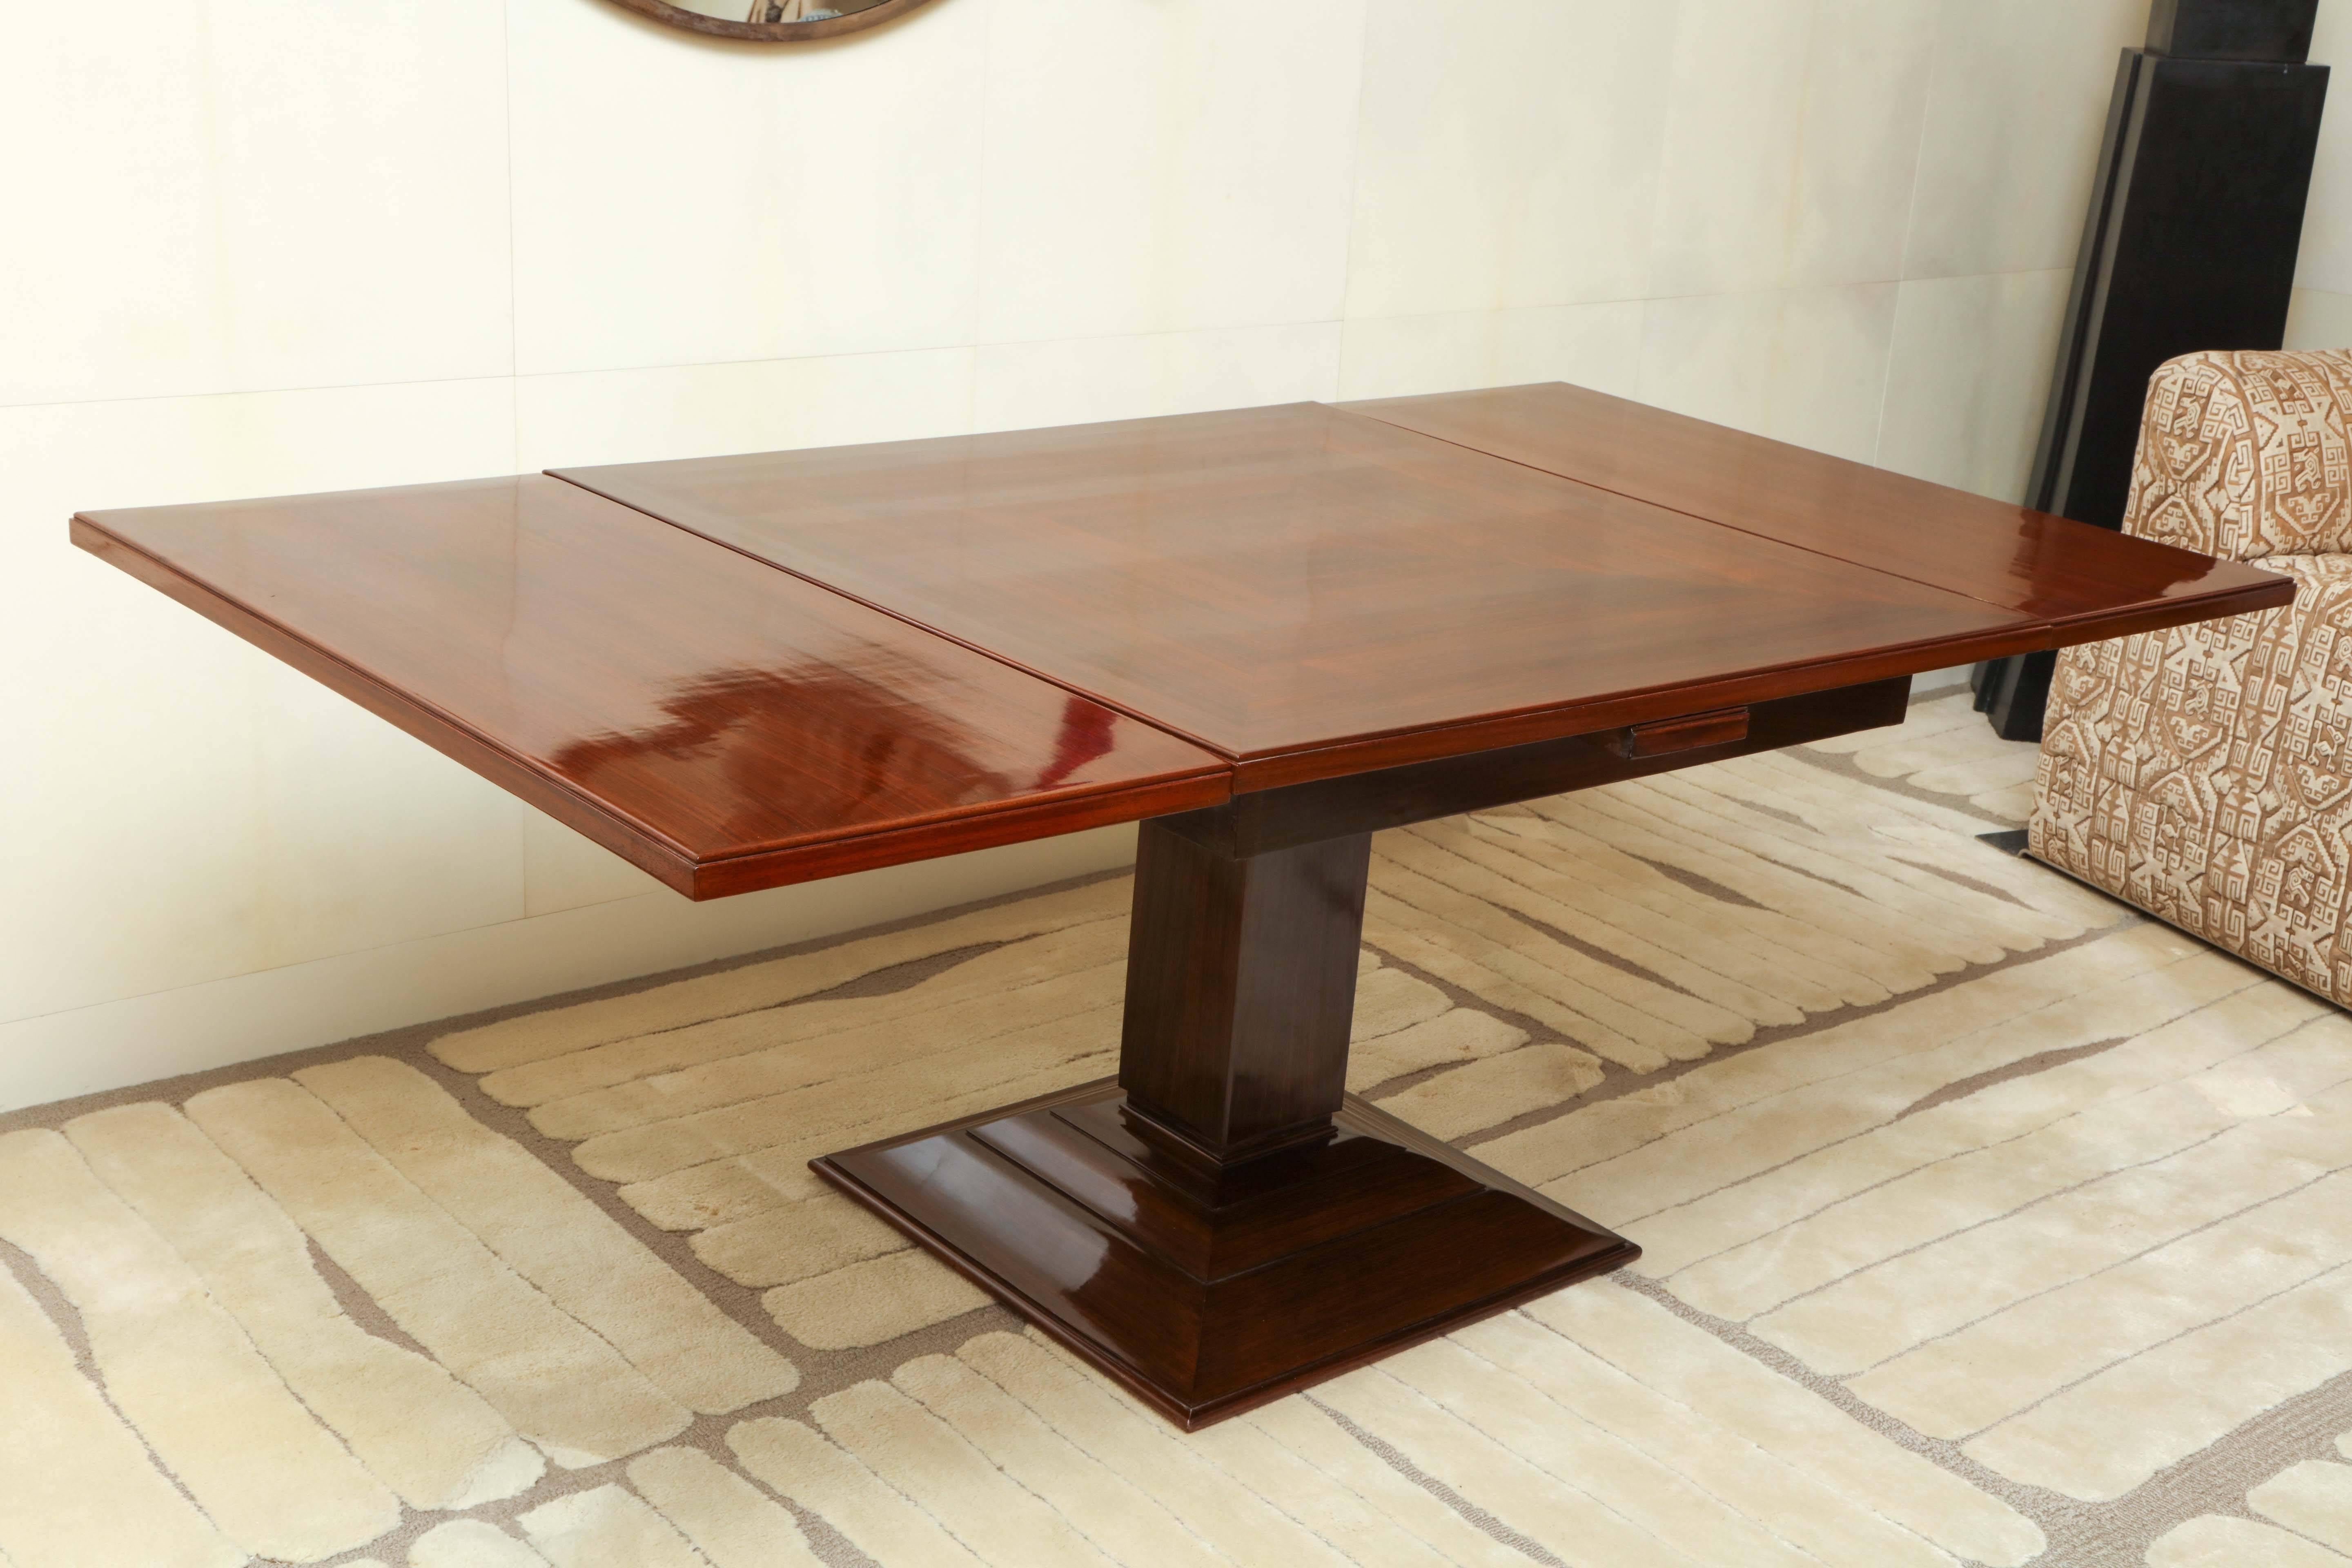 Ruhlmann French Art Deco Rosewood Extension Table Model 1315 NR For Sale 3